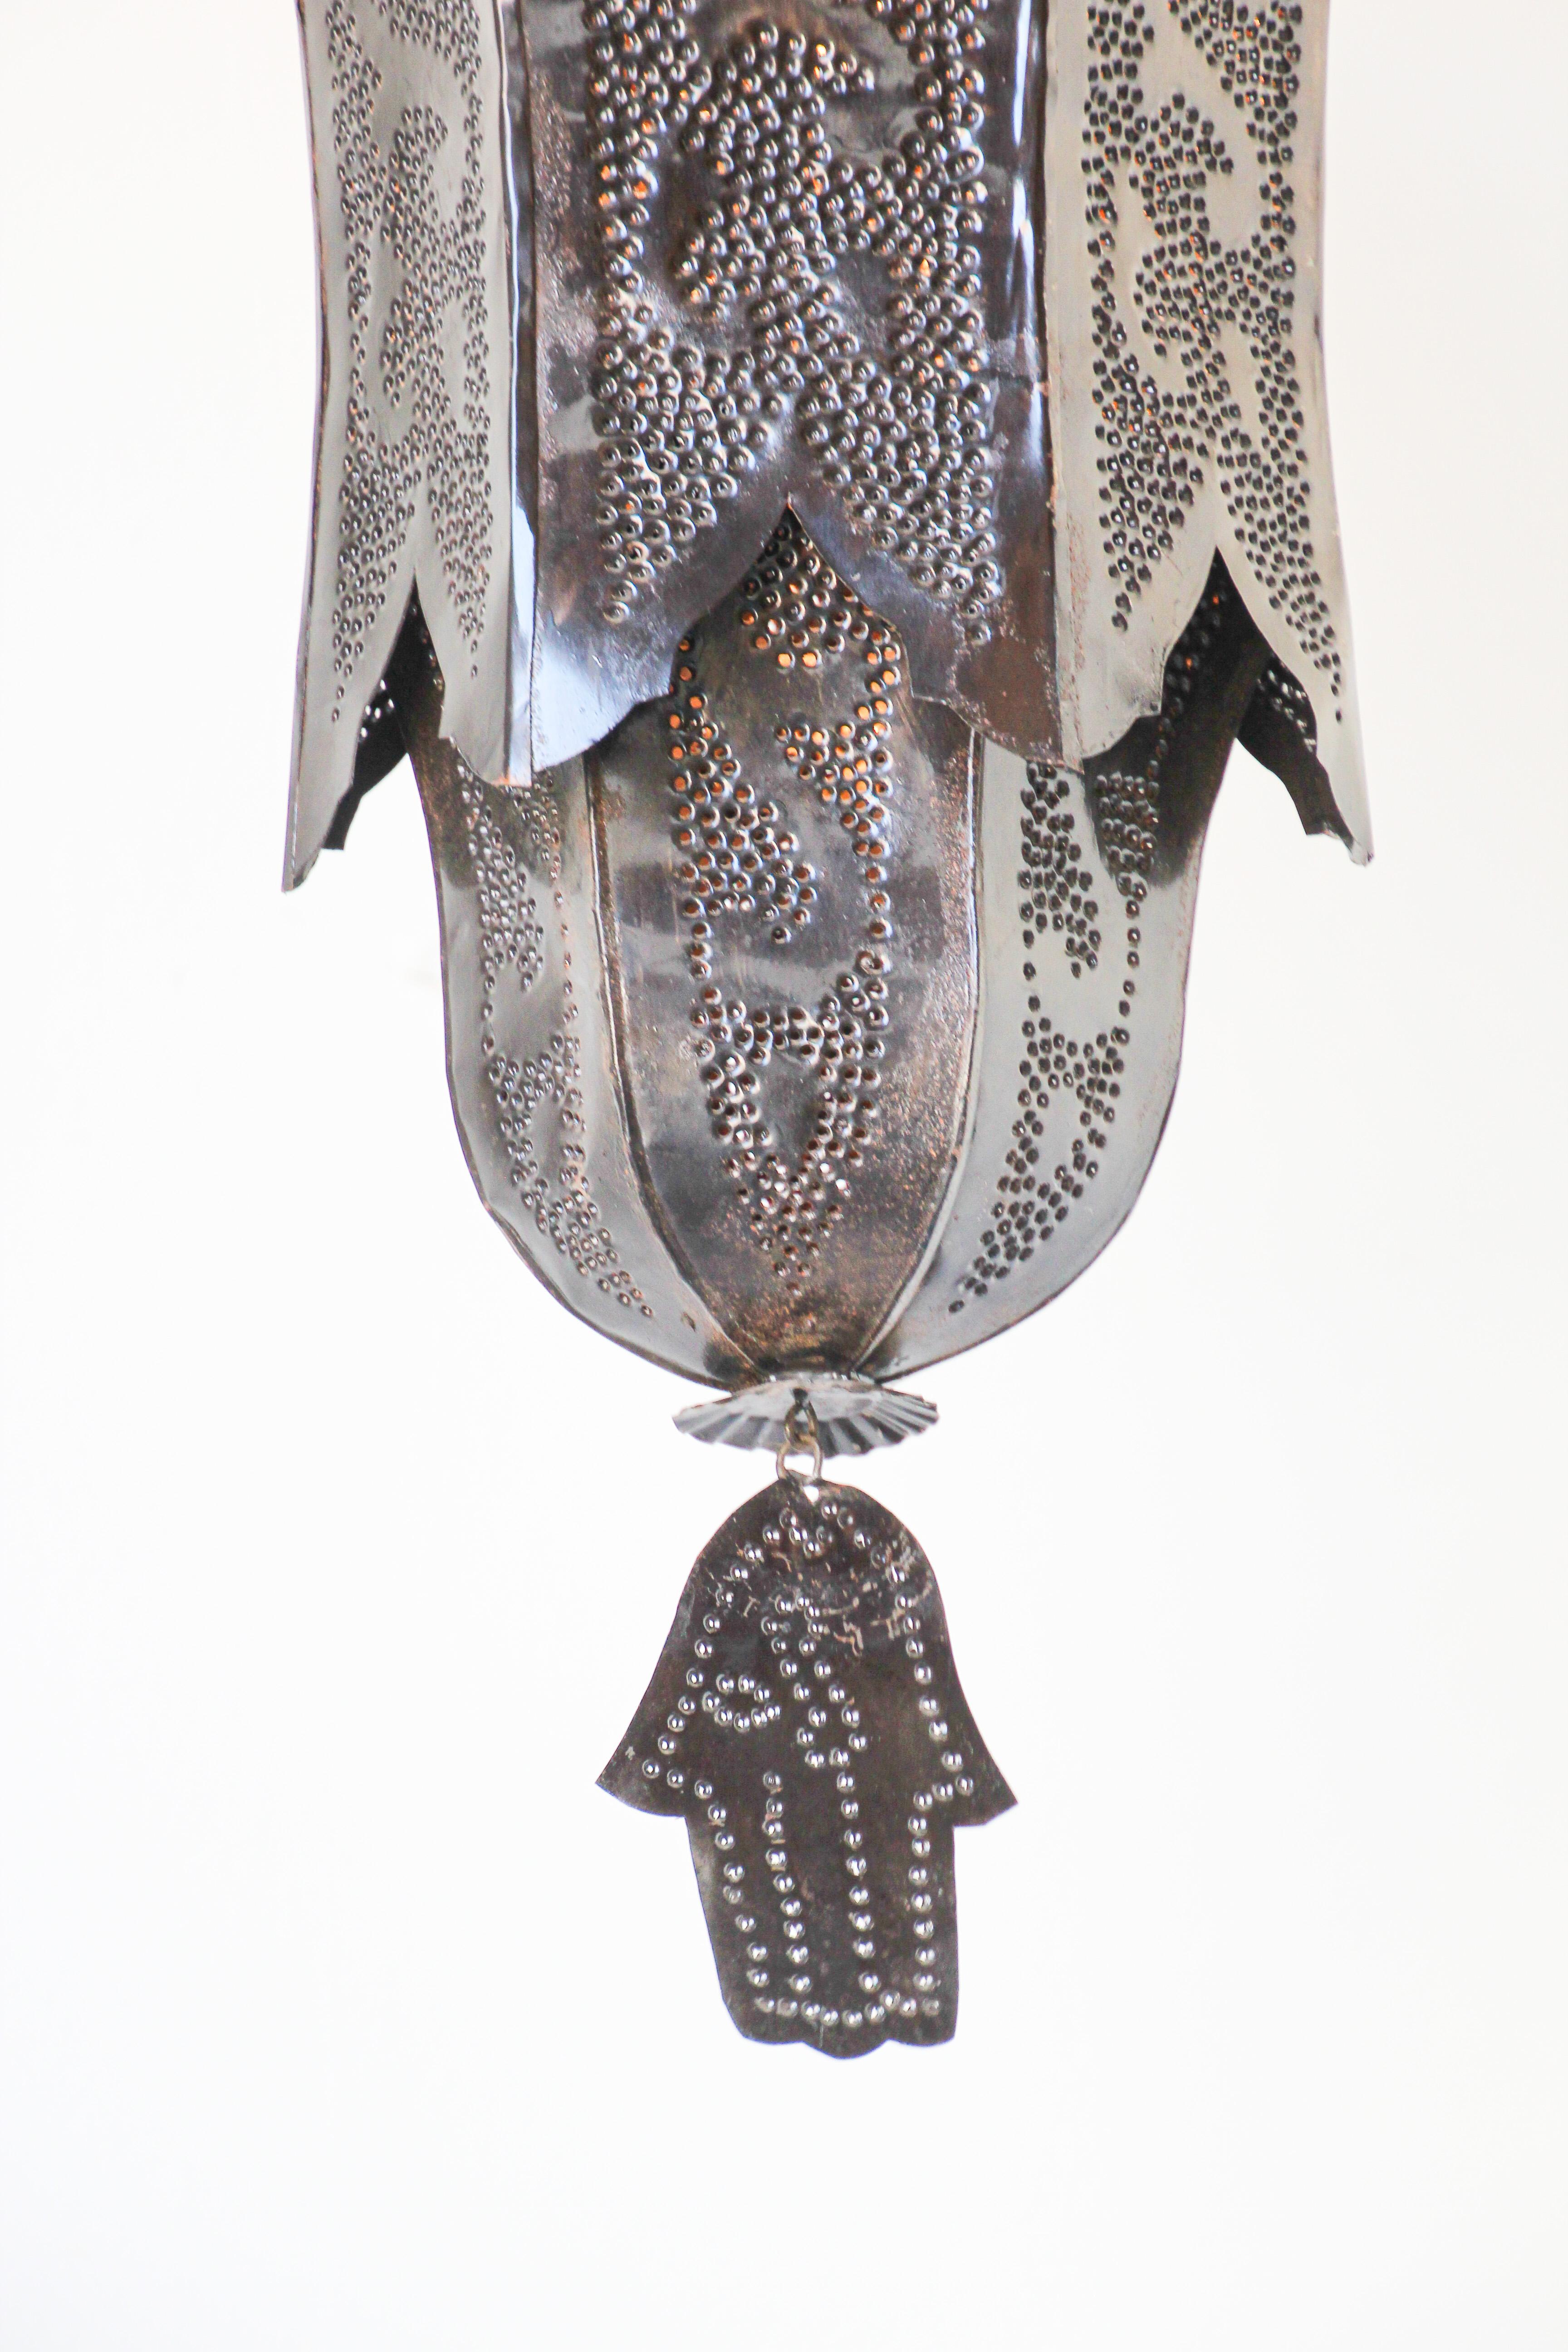 Moroccan Handcrafted Metal Lantern Pendant, North Africa For Sale 2